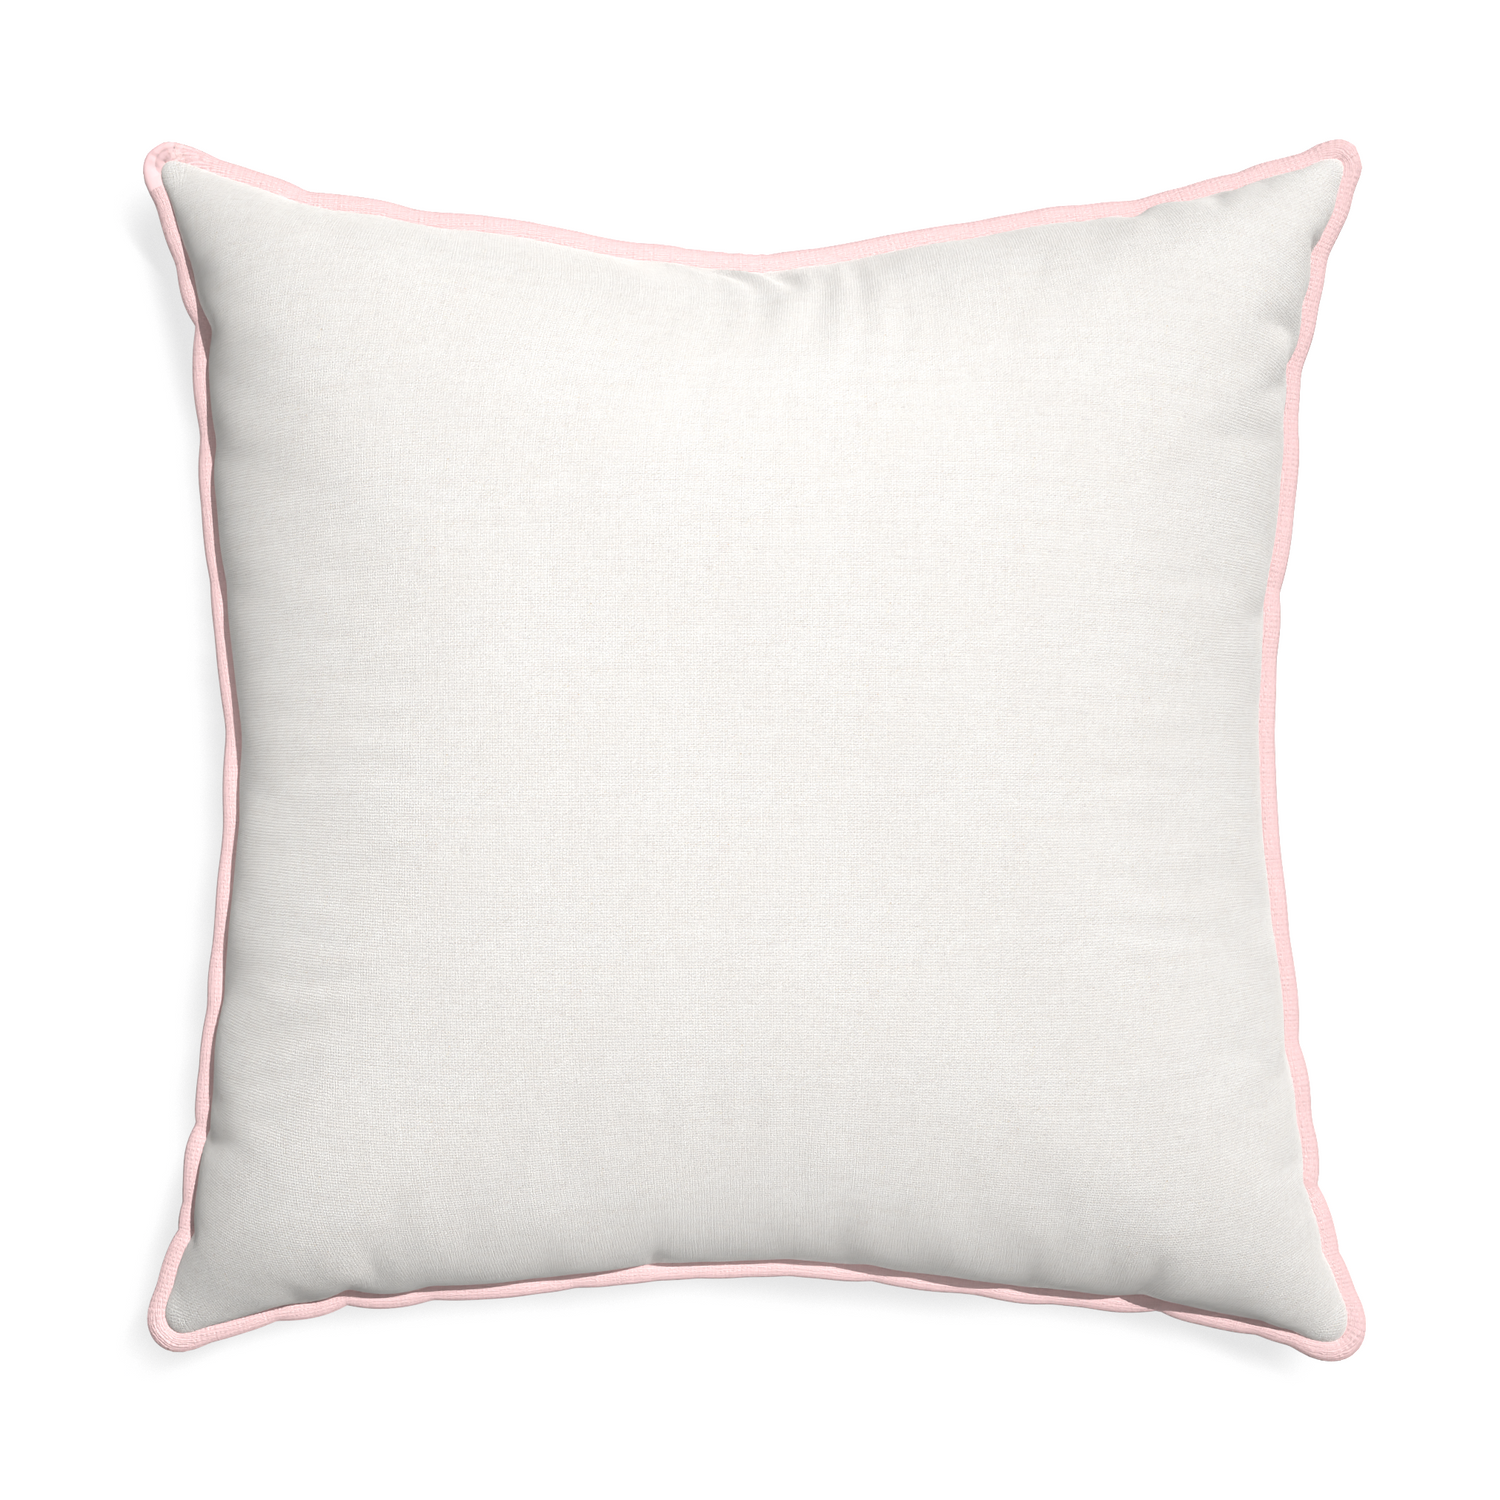 Euro-sham flour custom pillow with petal piping on white background